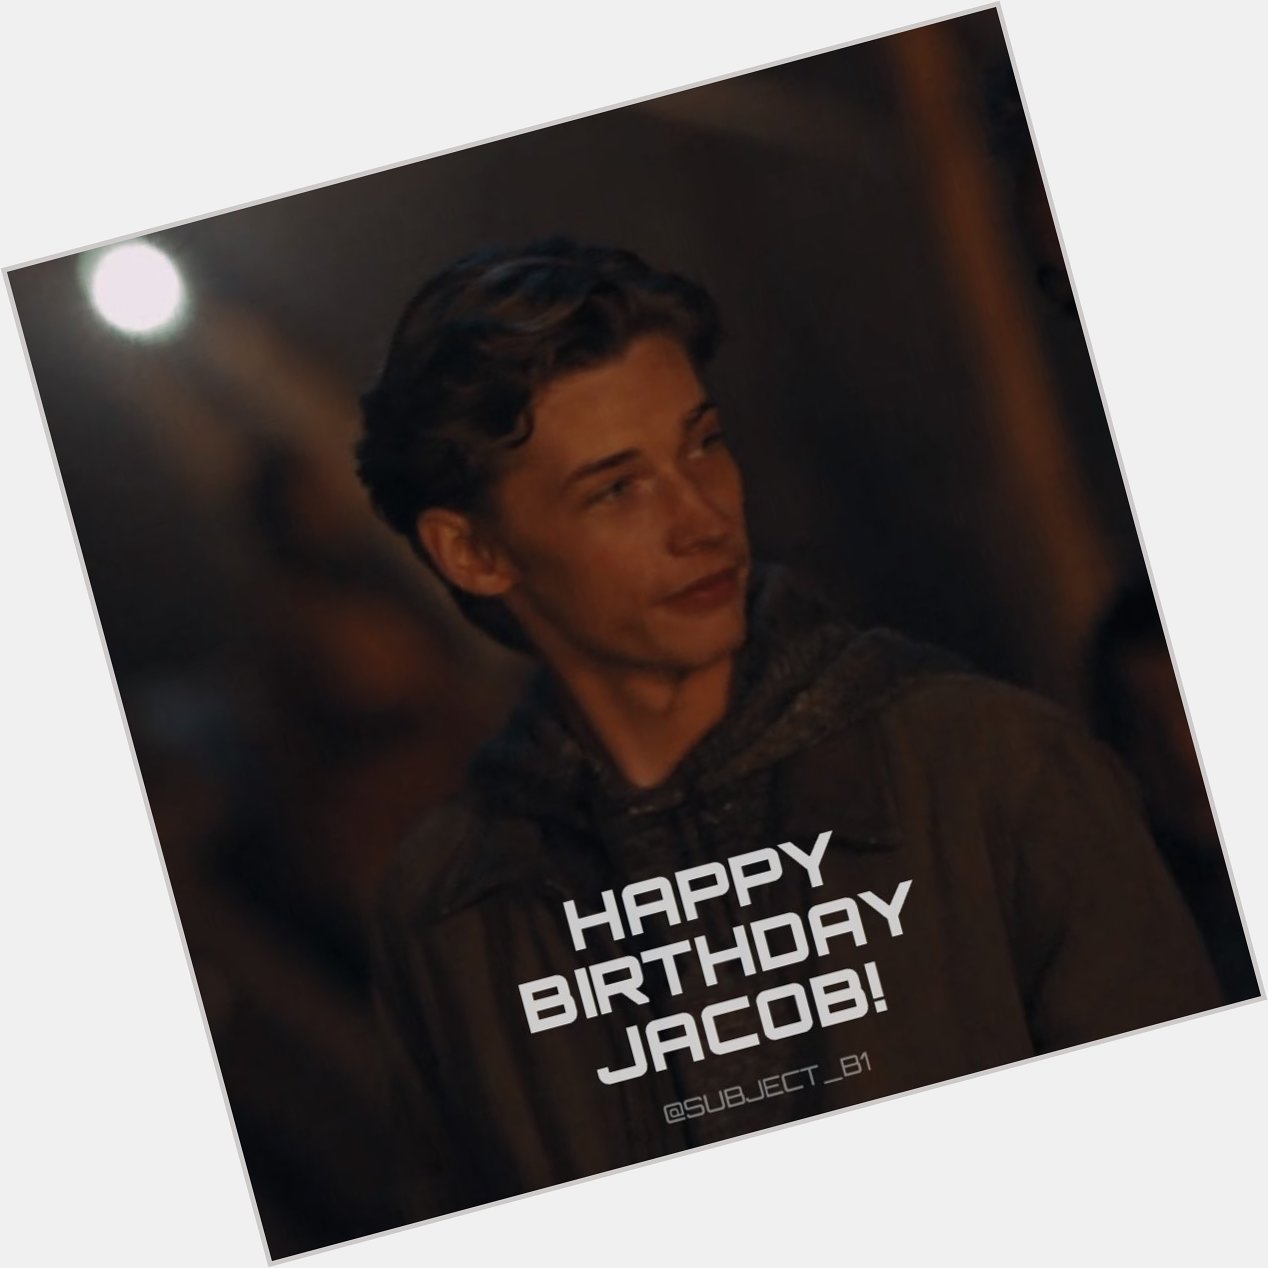 A very happy birthday to our Aris (Jacob Lofland)! I hope he has a good one!  